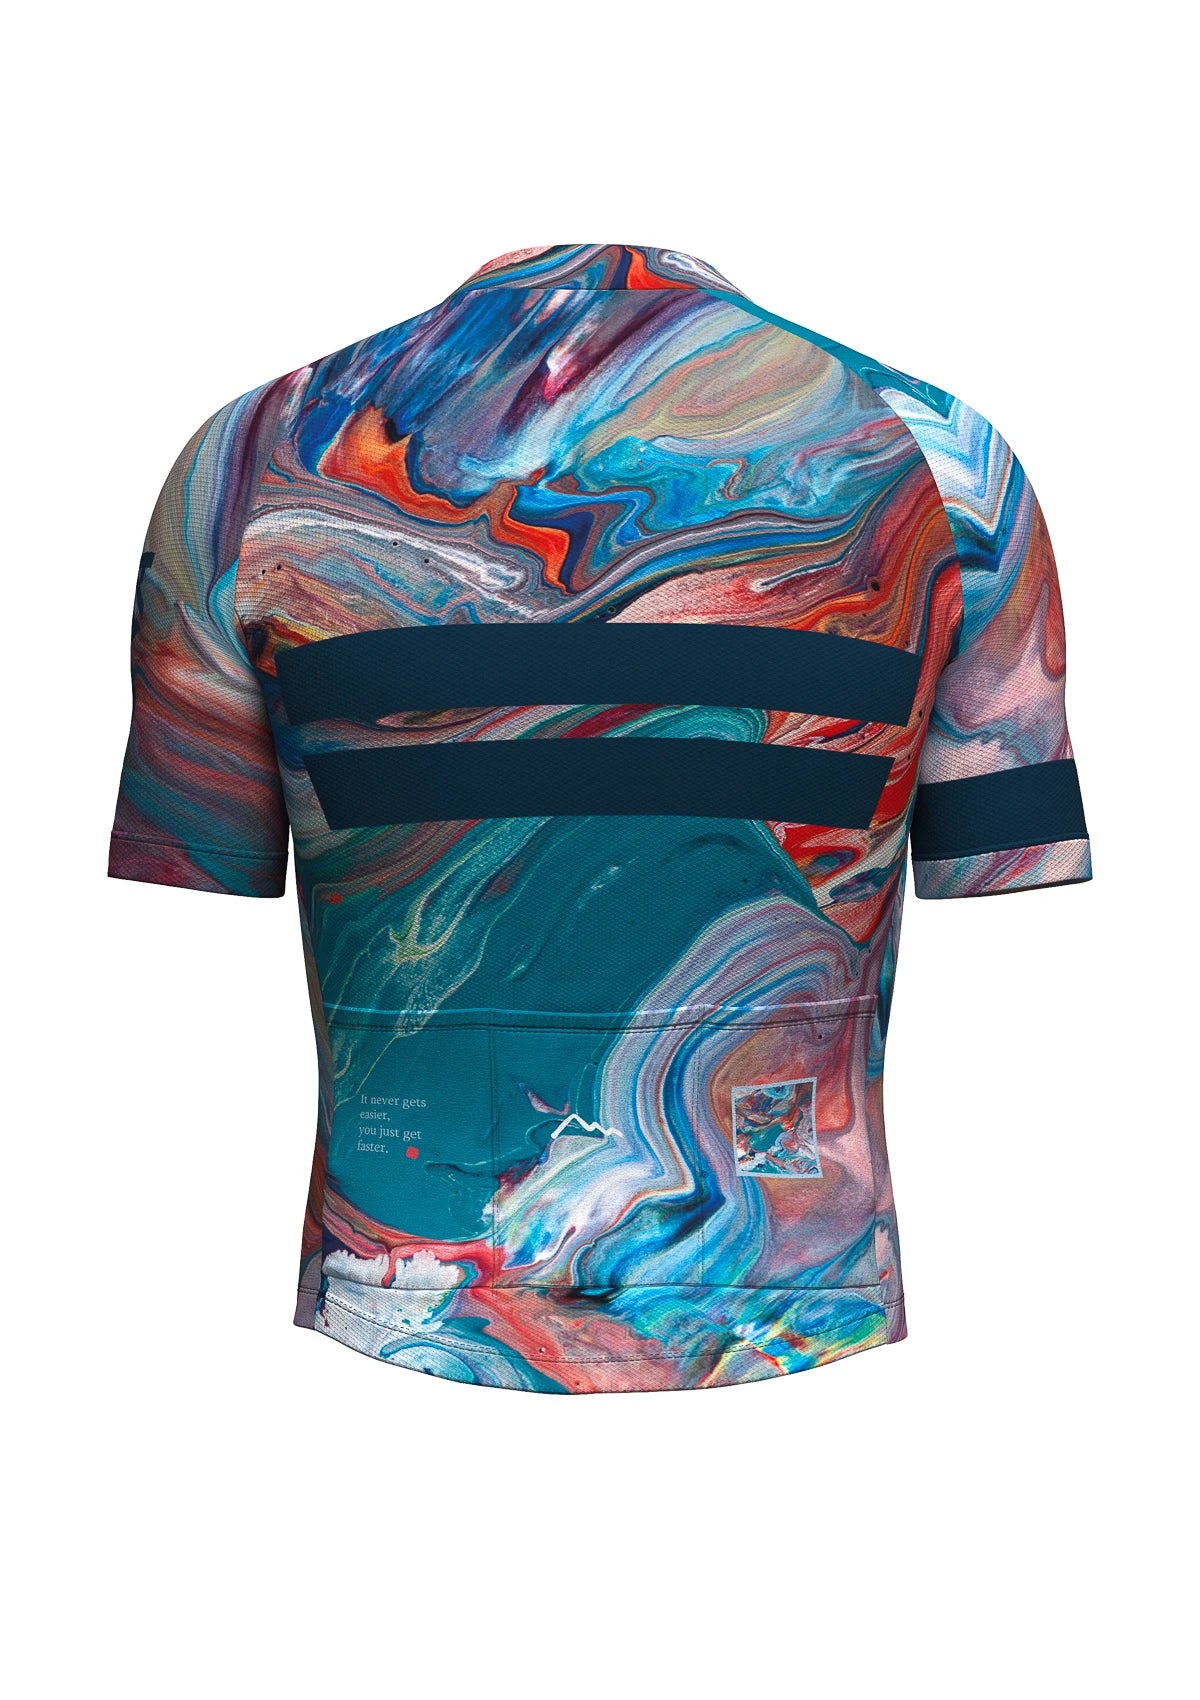 Ocean Classic Cycling Jersey